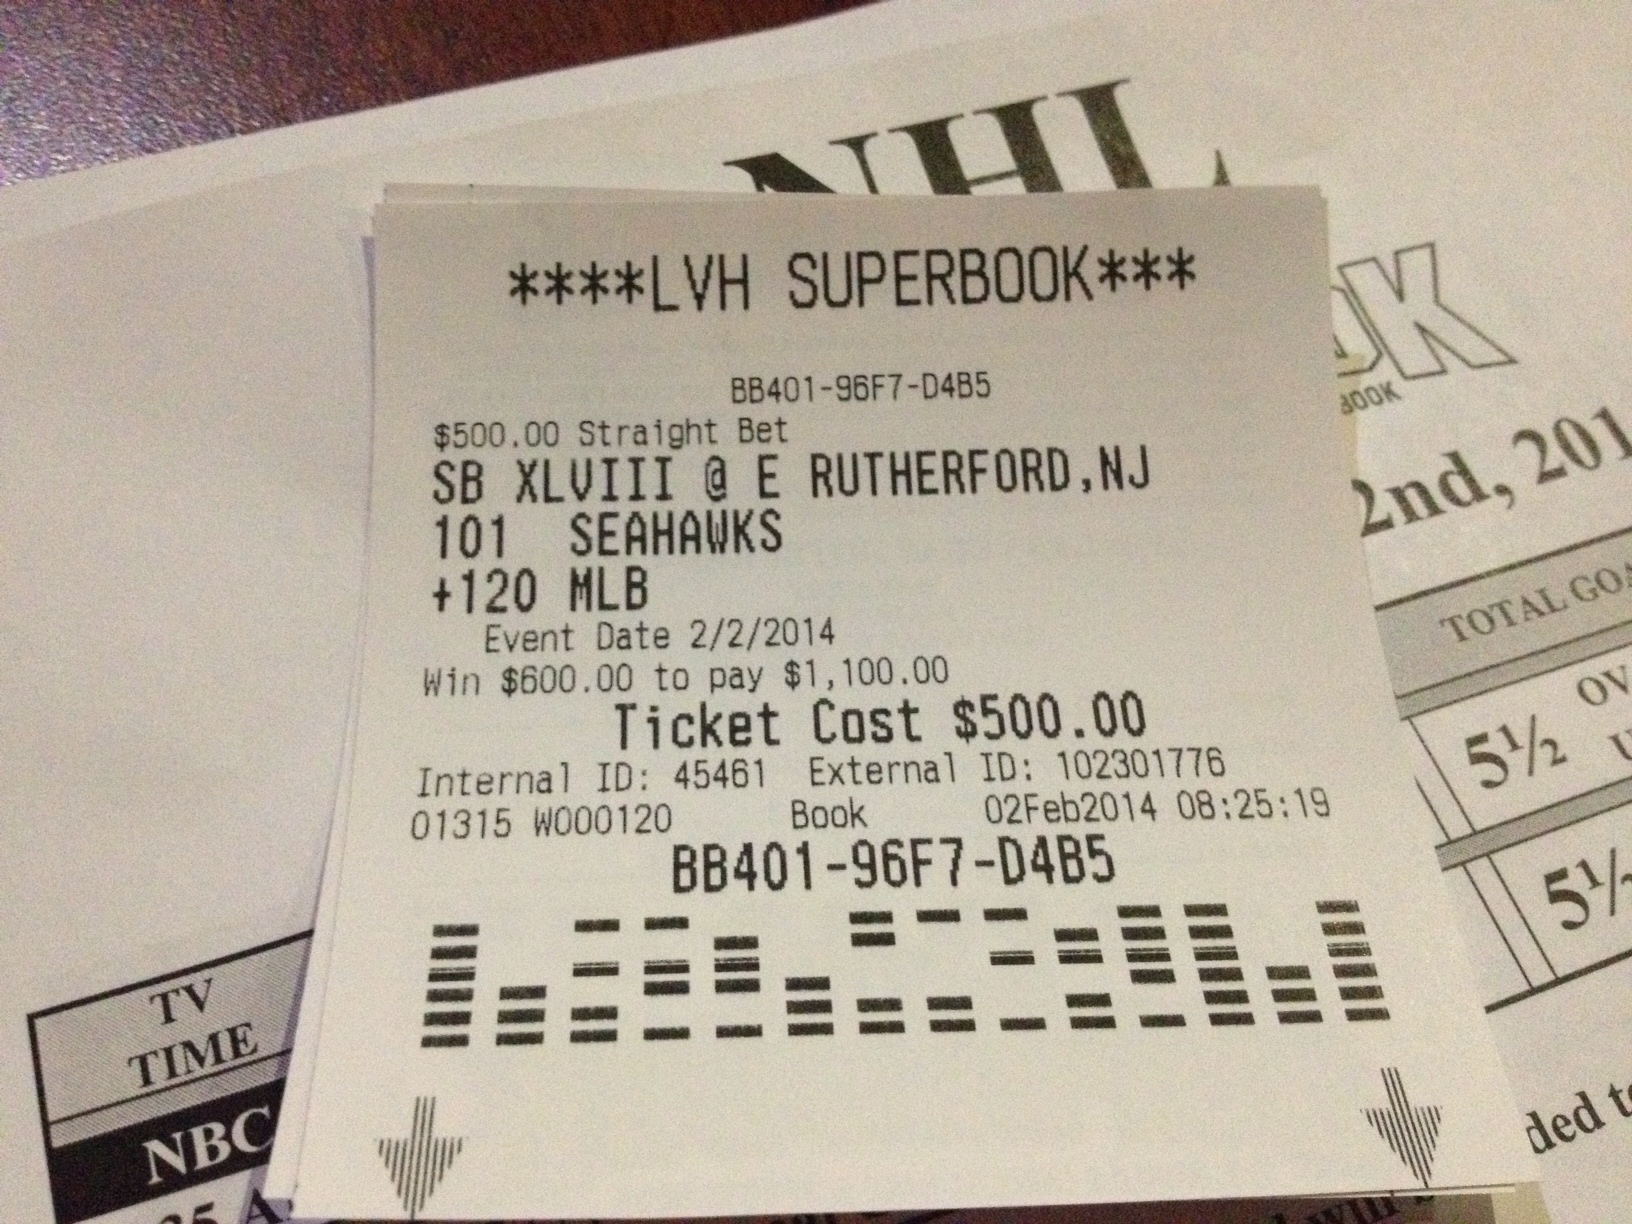 delaware parlay card online